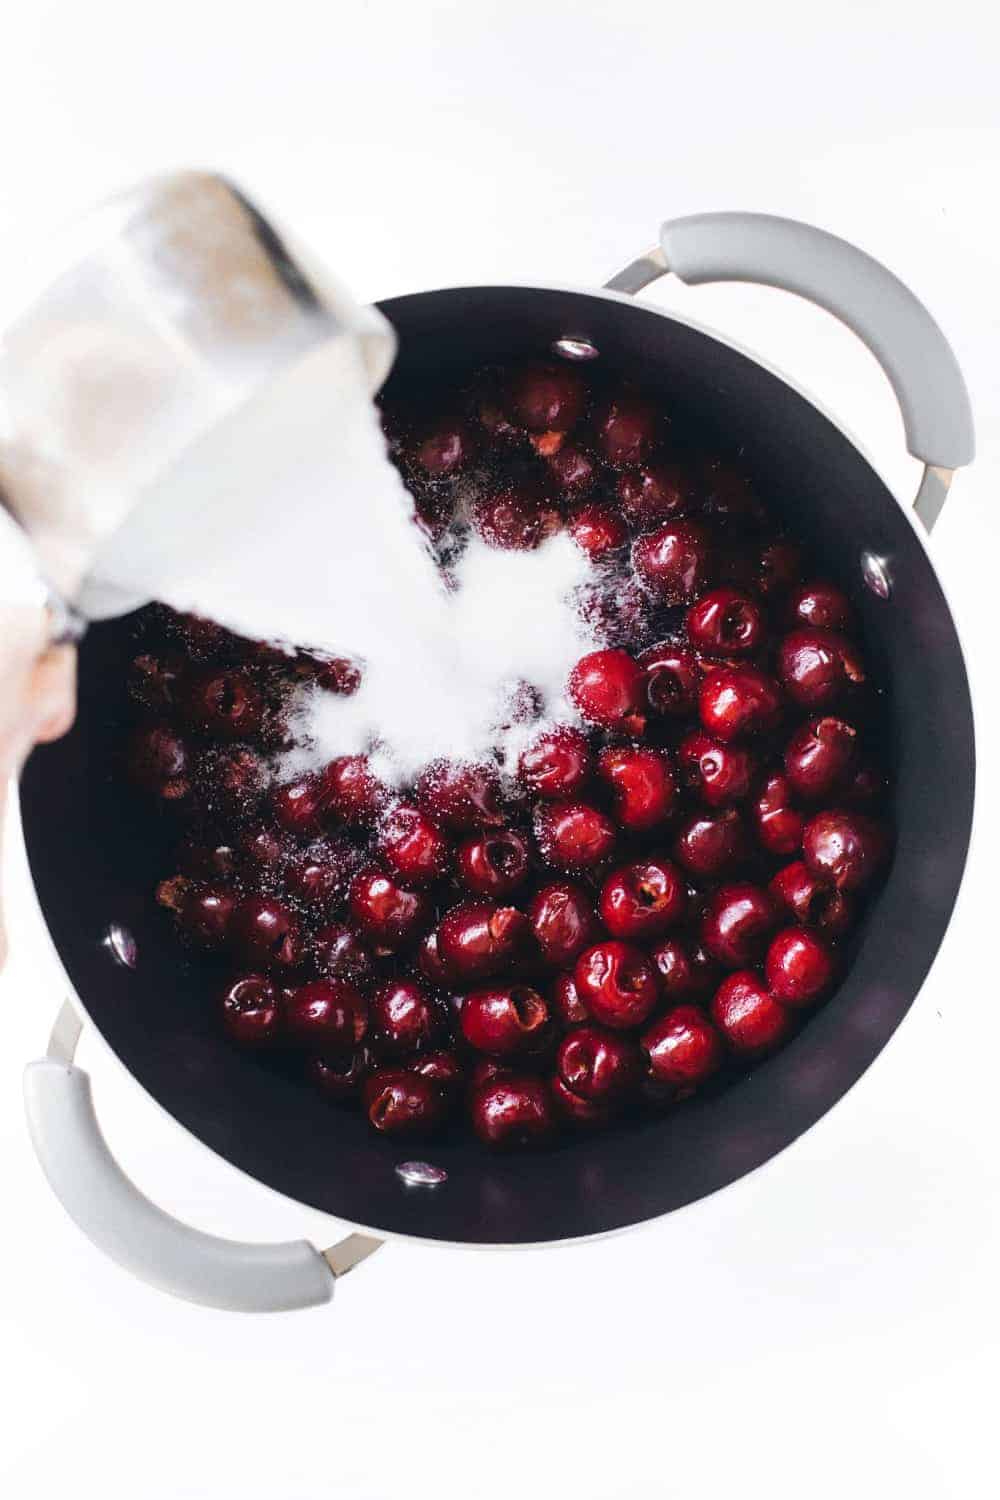 Homemade Cherry Pie Filling is easy to make and freezes beautifully